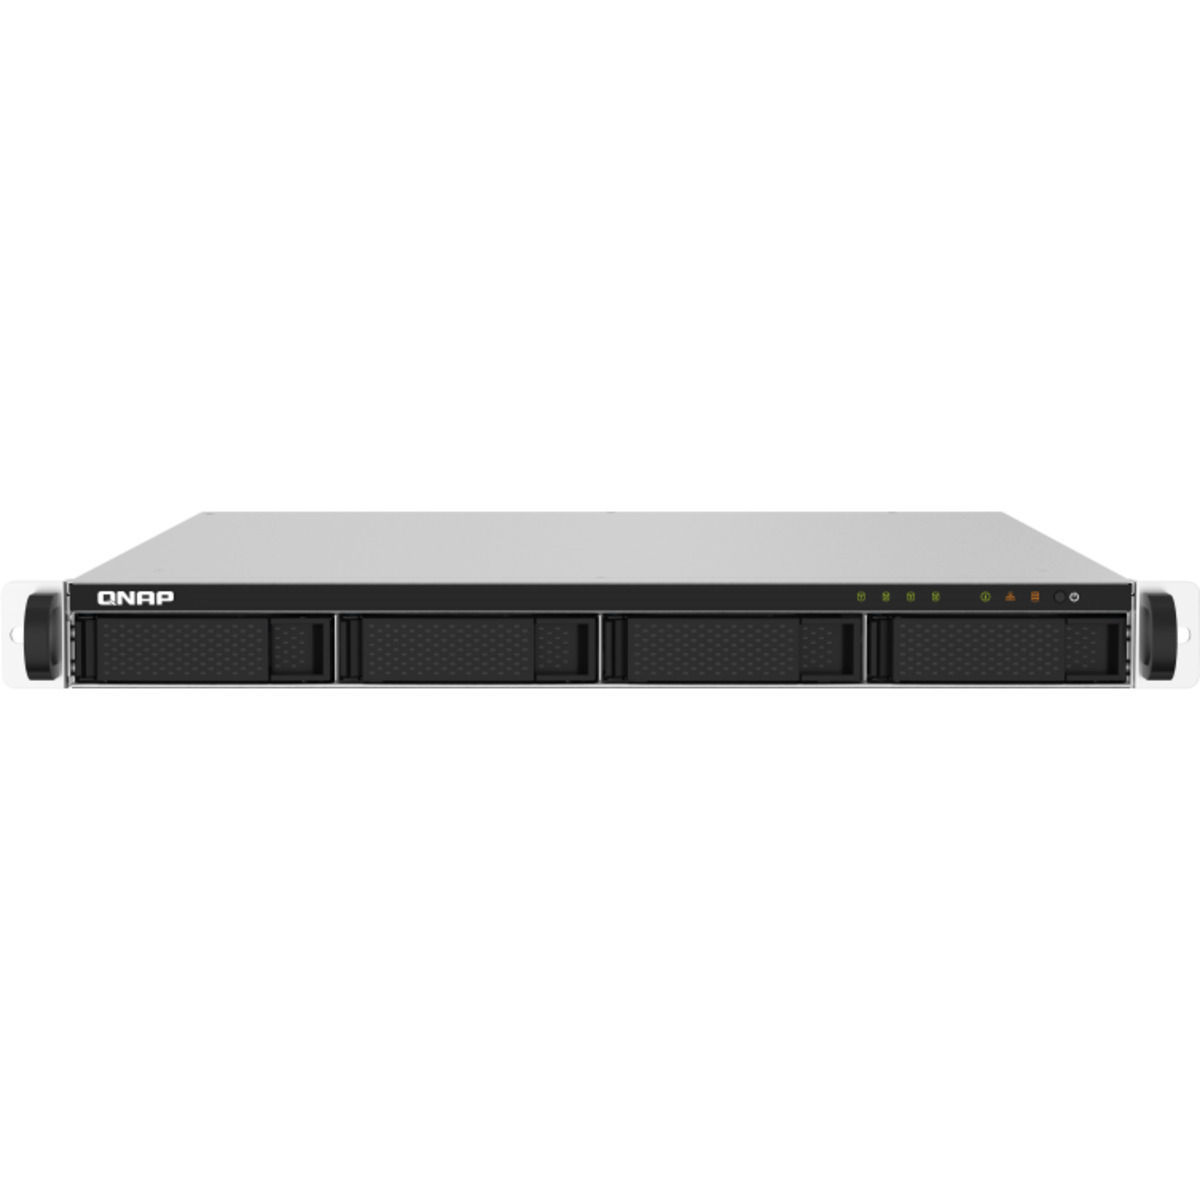 buy $1852 QNAP TS-432PXU-RP 32tb RackMount NAS - Network Attached Storage Device 4x8000gb Seagate BarraCuda ST8000DM004 3.5 5400rpm SATA 6Gb/s HDD CONSUMER Class Drives Installed - Burn-In Tested - FREE RAM UPGRADE - nas headquarters buy network attached storage server device das new raid-5 free shipping usa christmas new year holiday sale TS-432PXU-RP